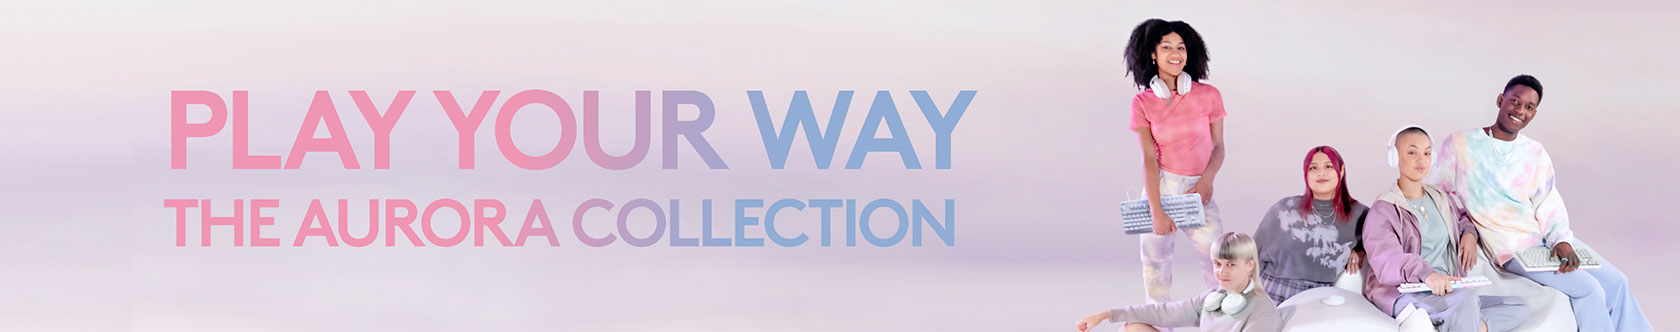 PLAY YOUR WAY THE AURORA COLLECTION